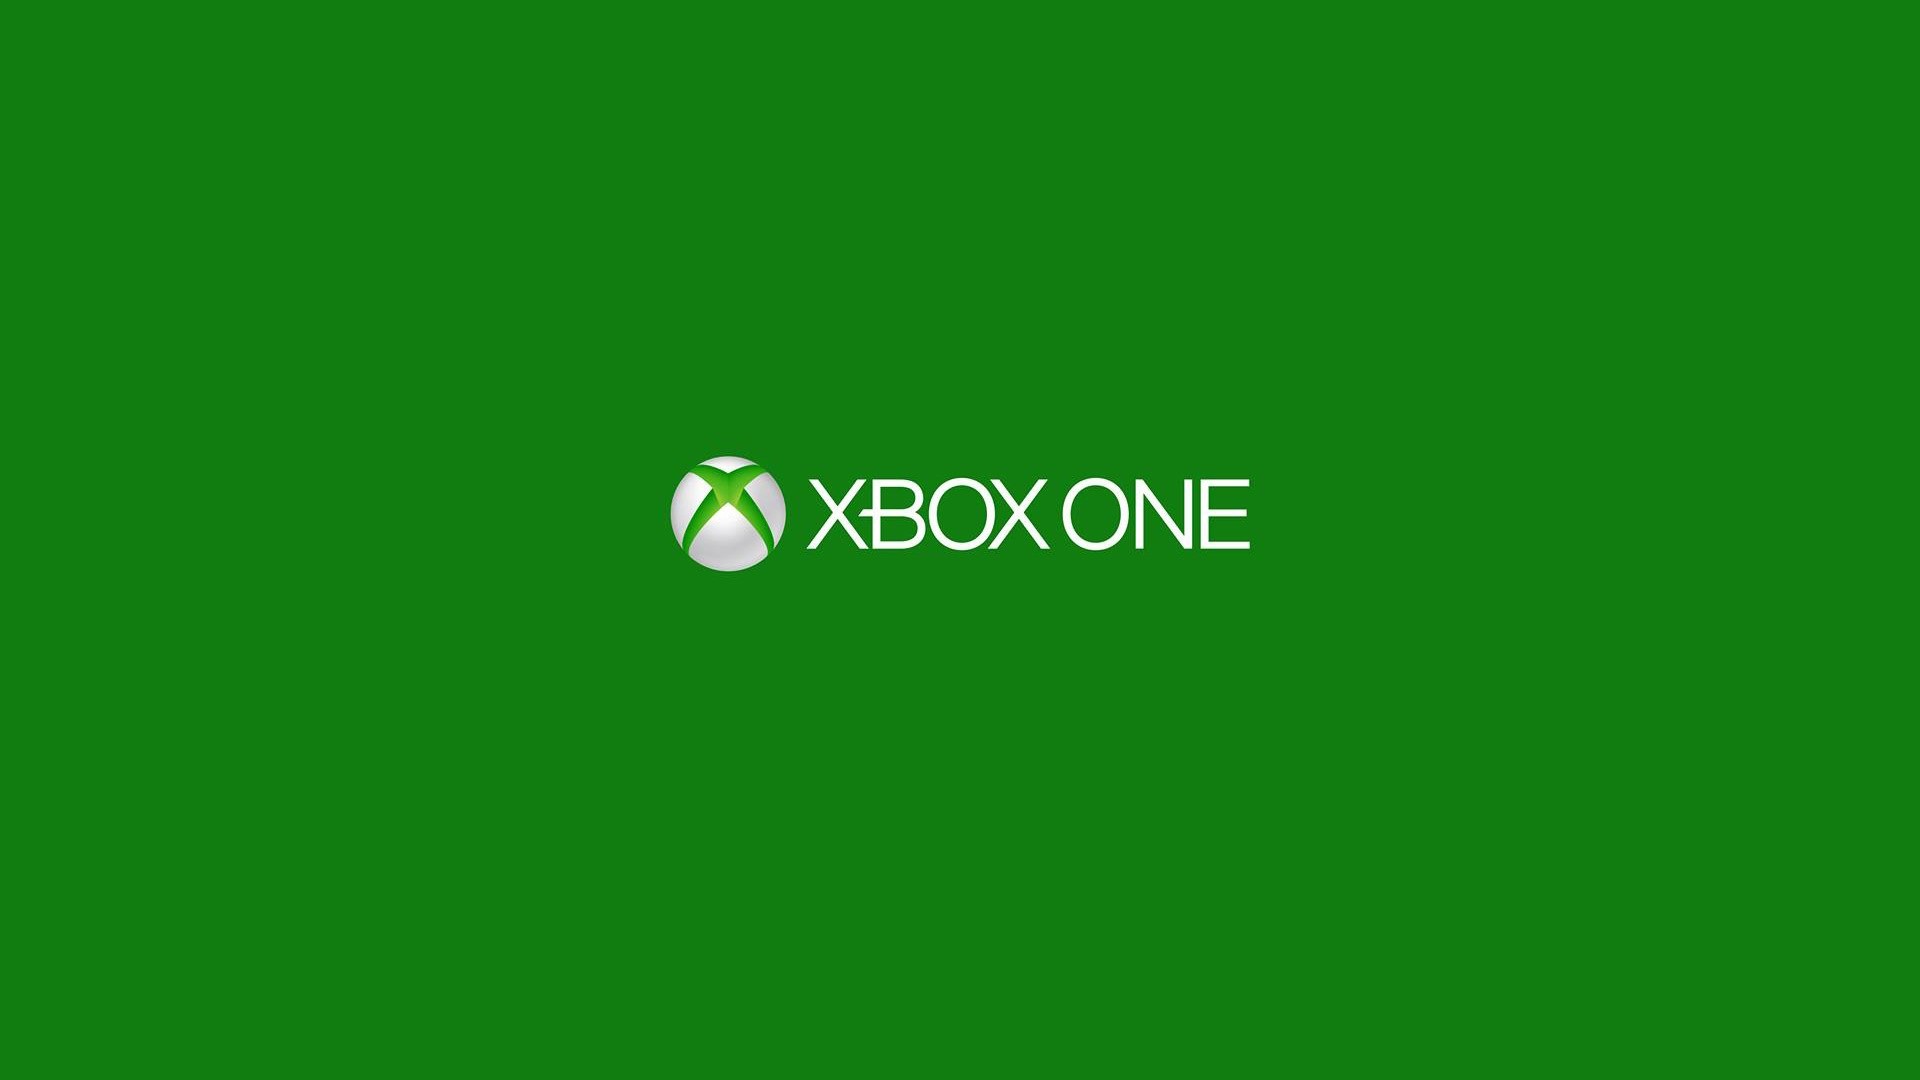 1920x1080 How To Change Your Home Screen Background!! (Xbox One)